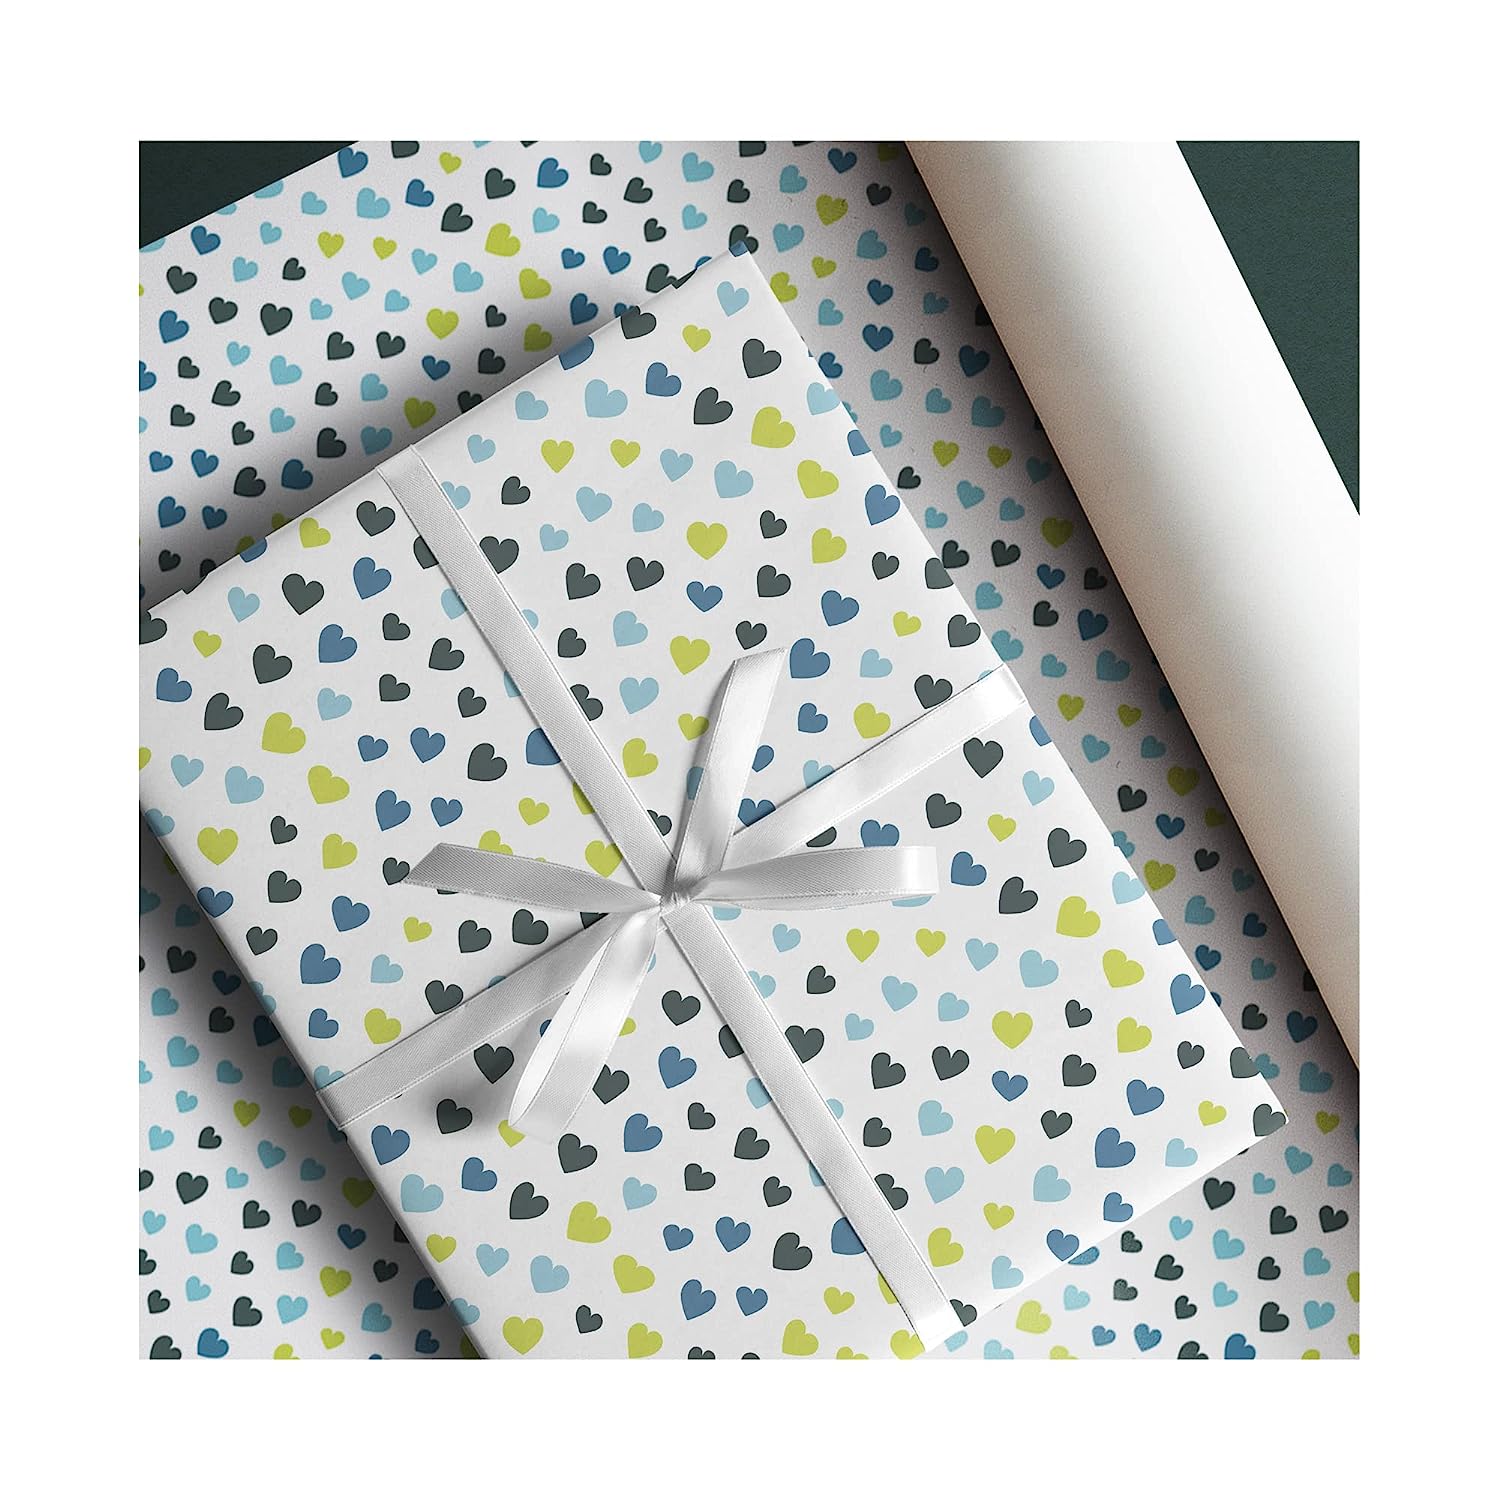 Space theme gift wrap for gifts|Personalize name